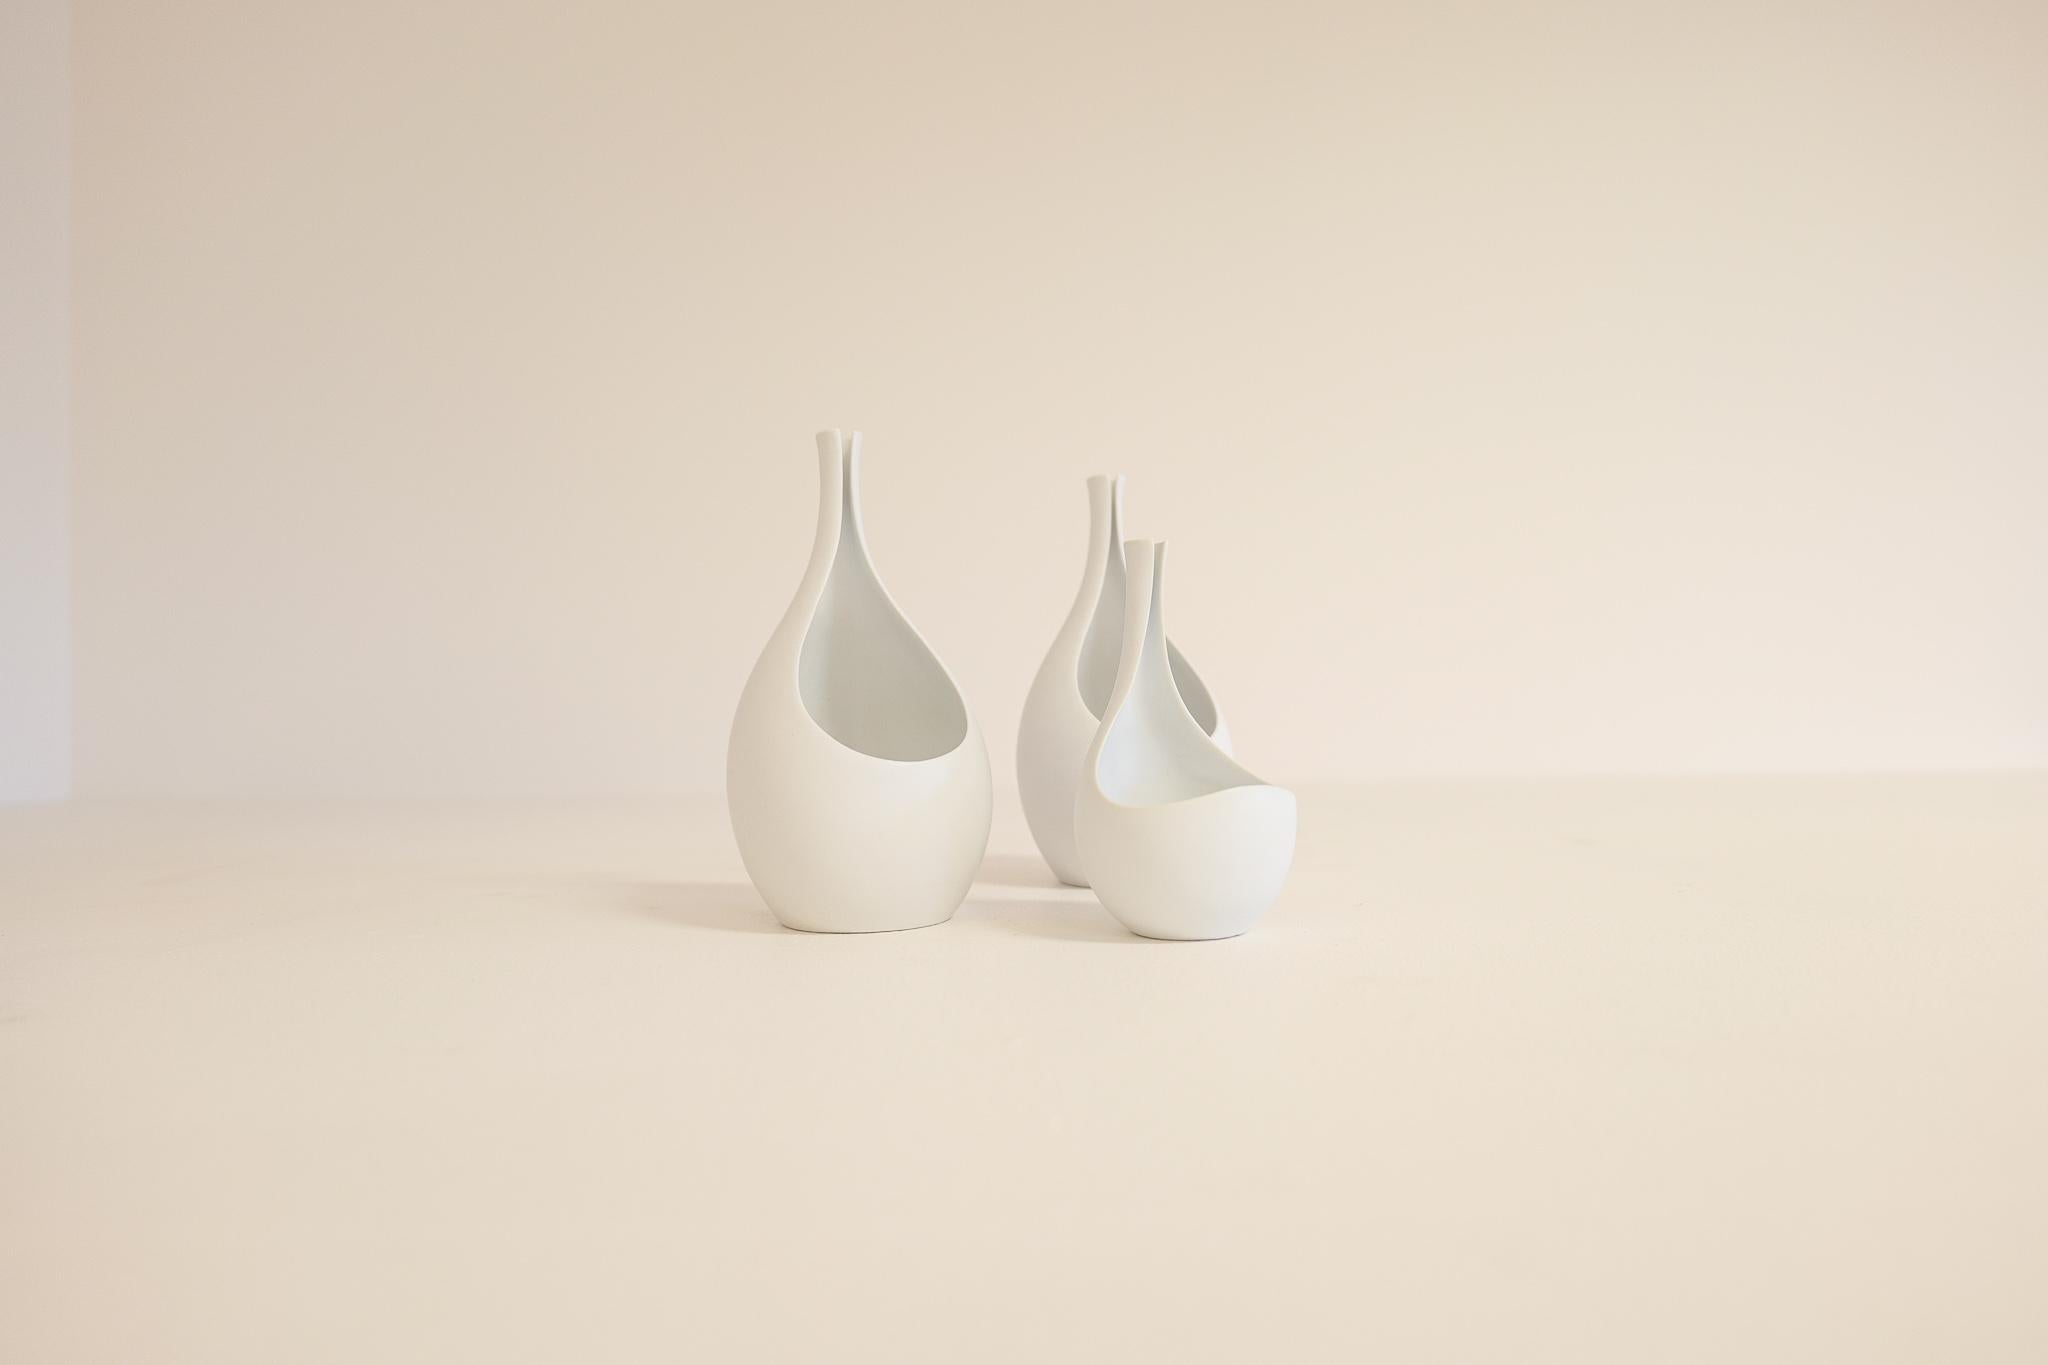 The pungo vase made in Sweden 1950s by the master Stig Lindberg for Gustavsberg. The pungo vase have the most beautiful form and with its matt white glaze this is a piece for many environments. Here is a collection of two large ones and one small.